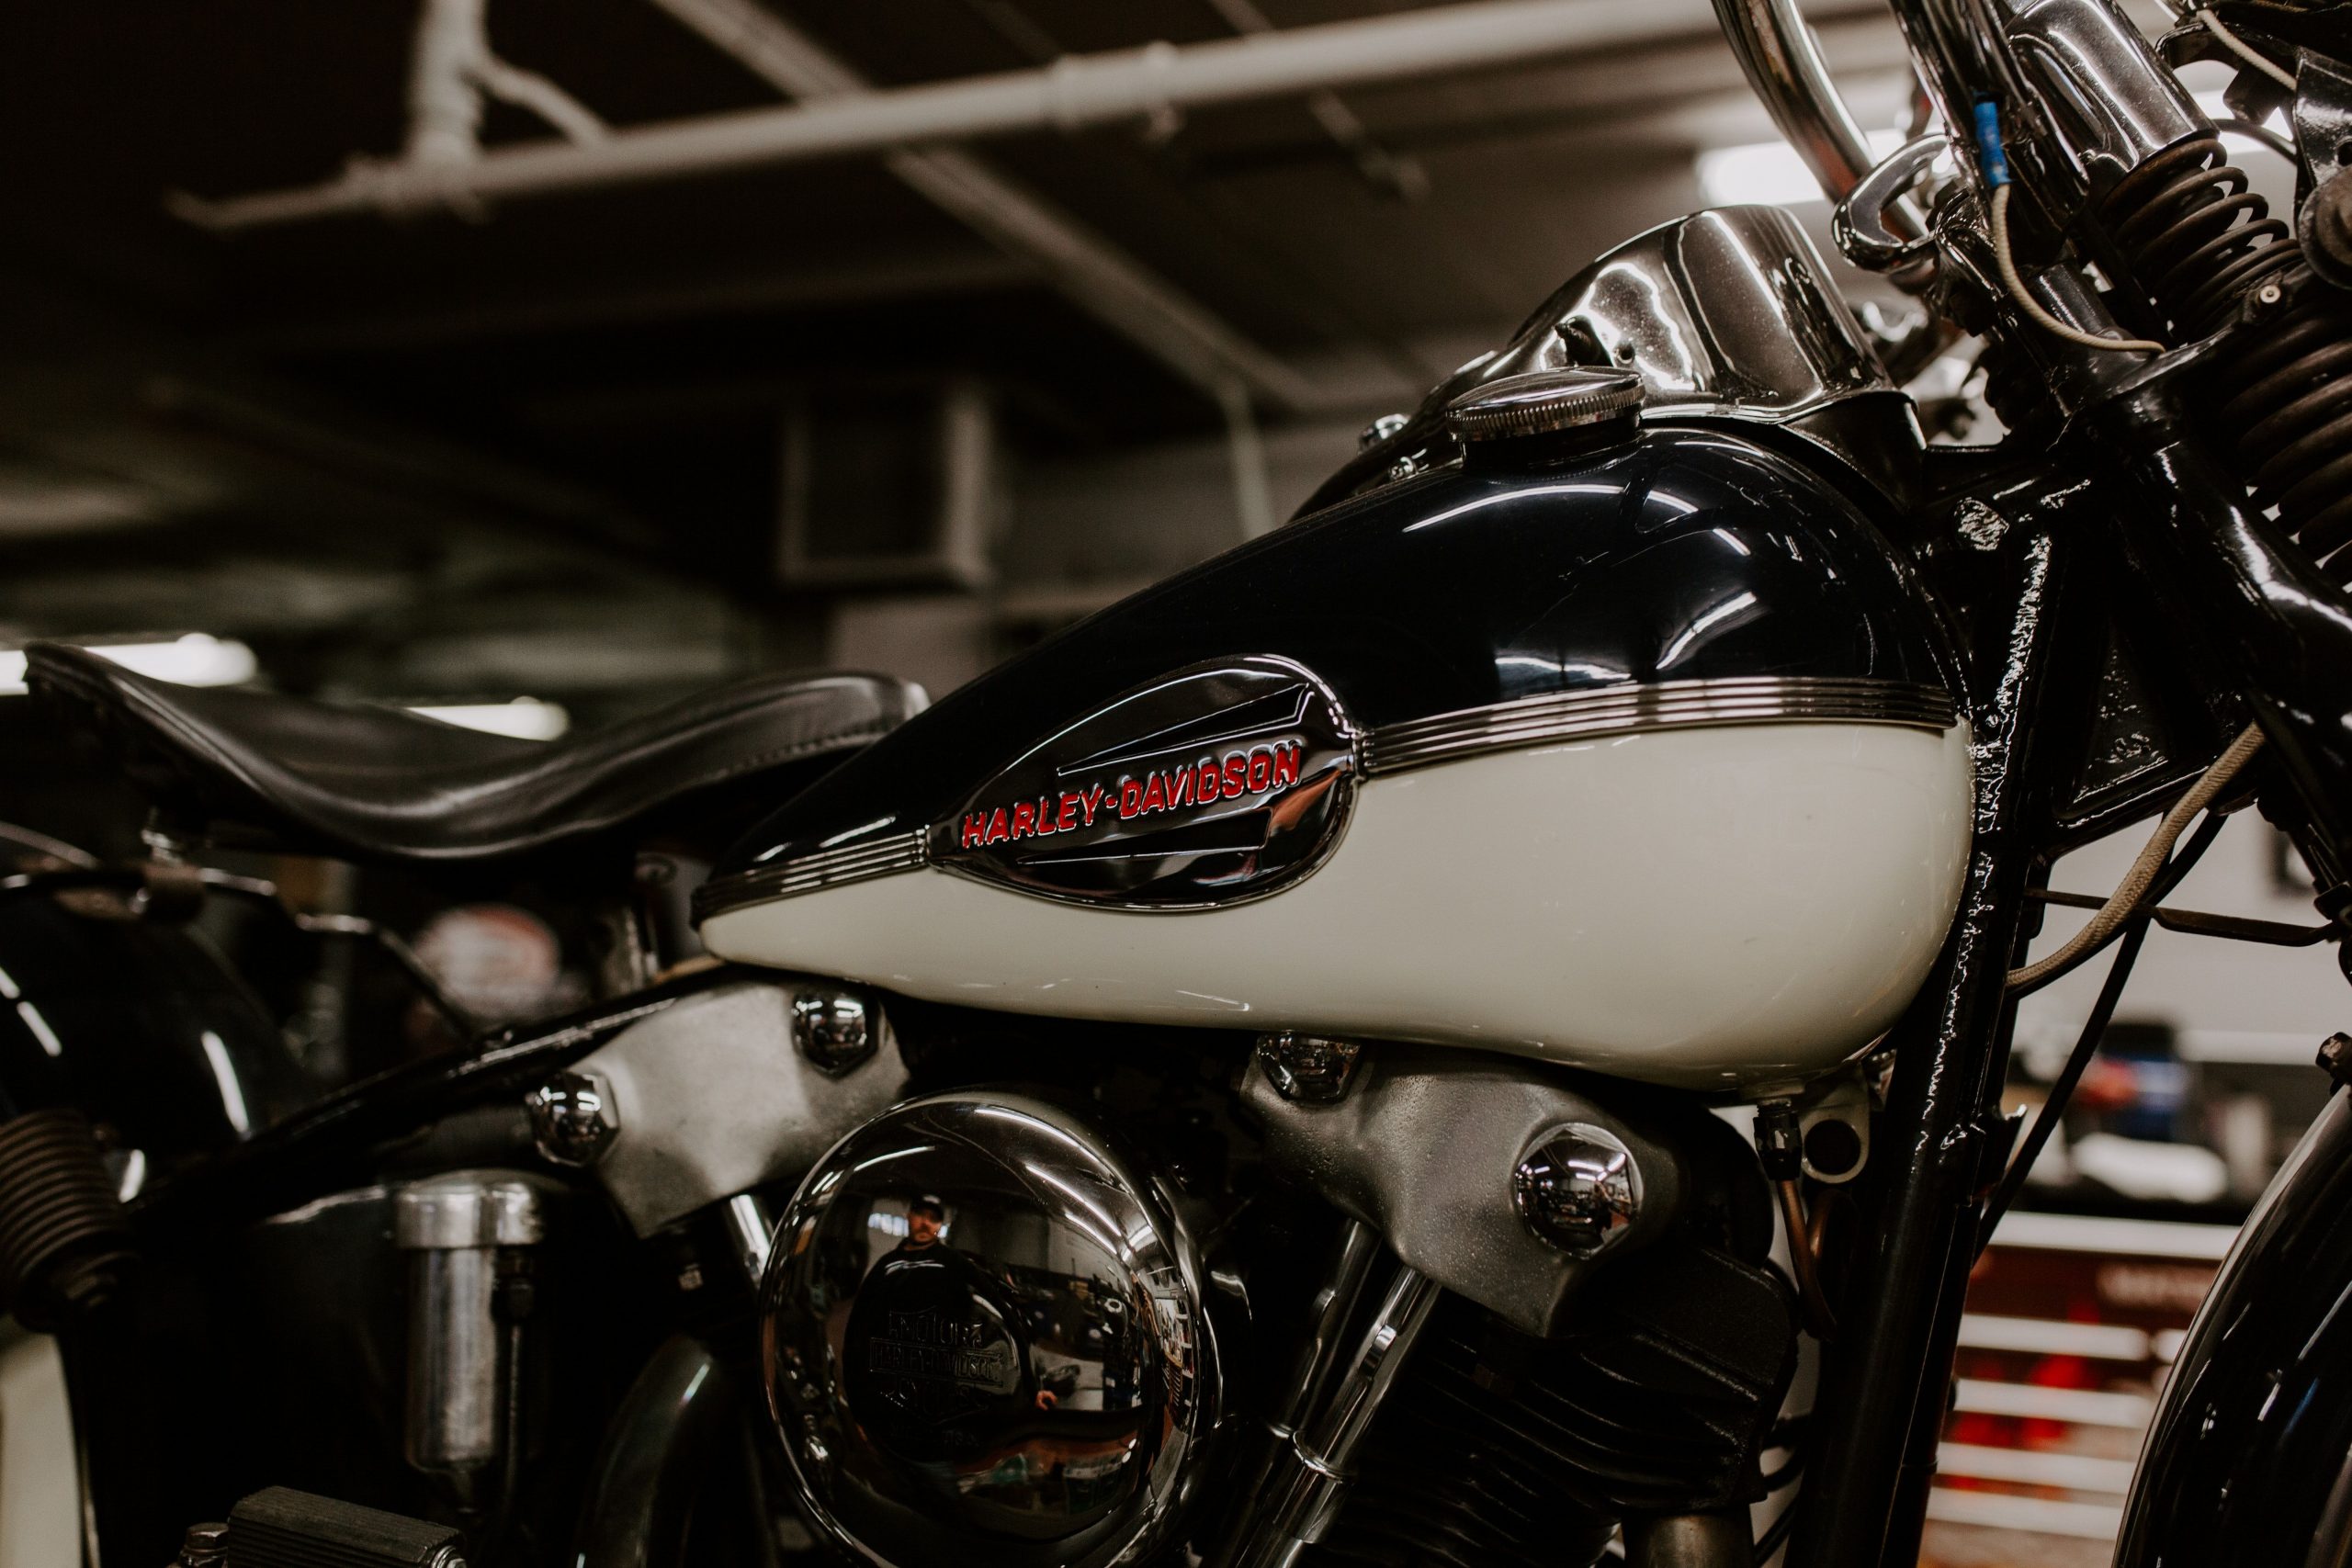 Harley-Davidson discontinues sales, manufacturing operations in India